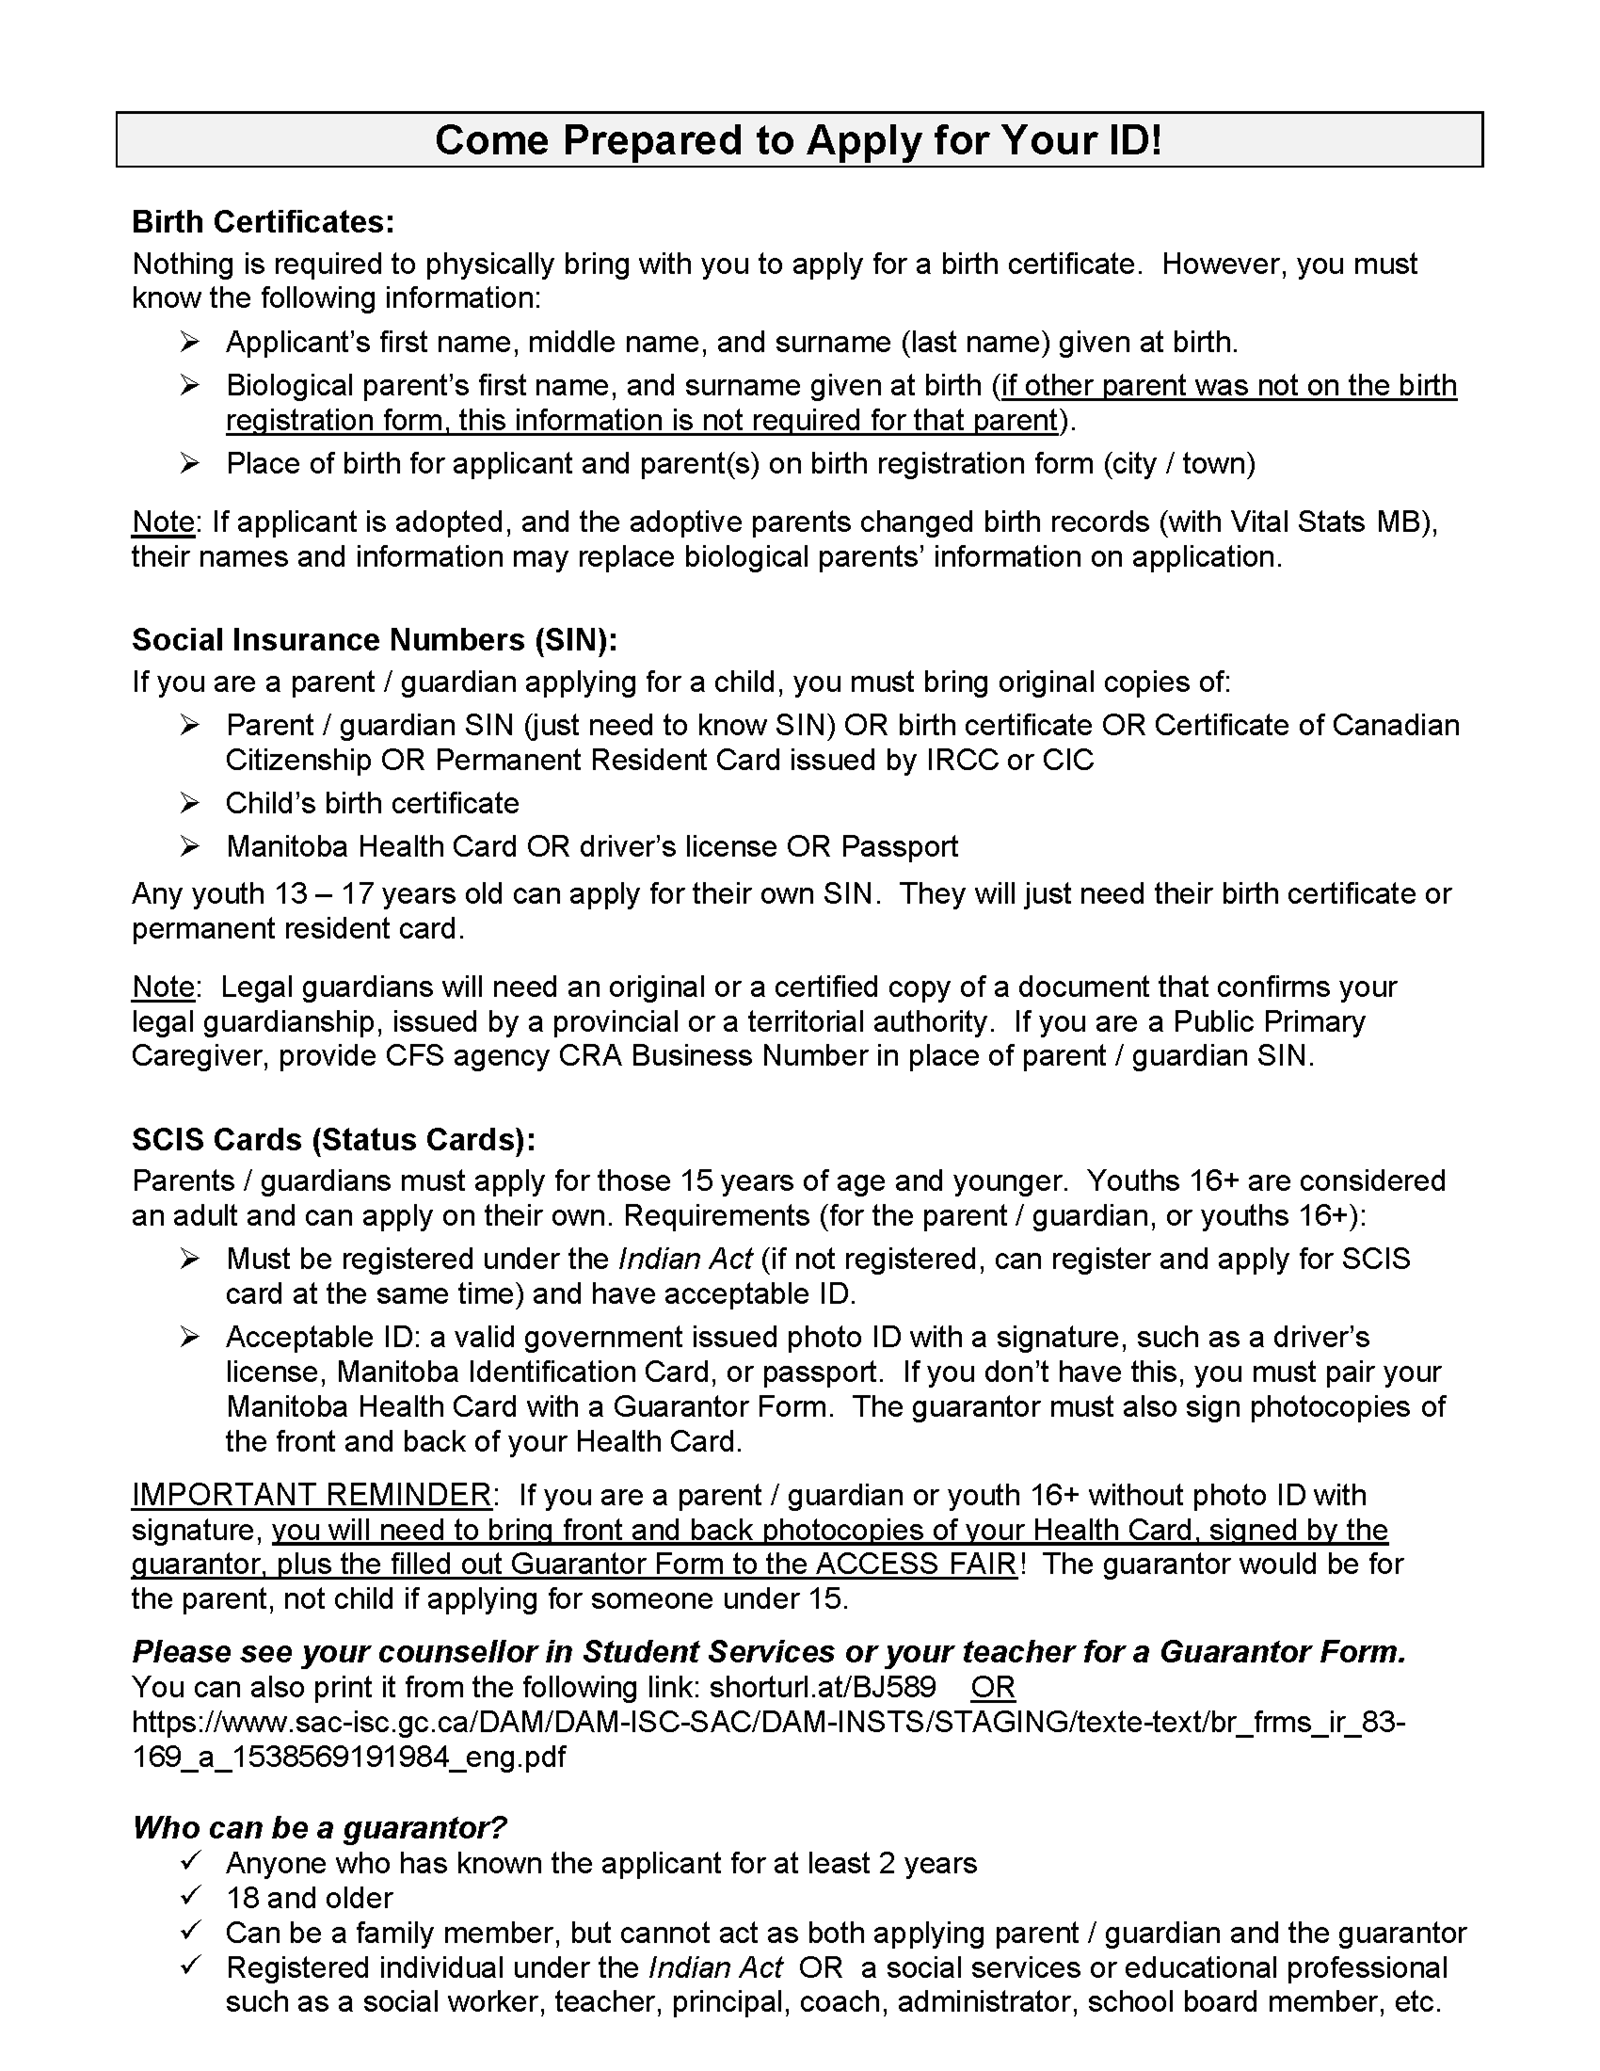 Access-Fair-Letter-to-Community-2022_Page_3.png